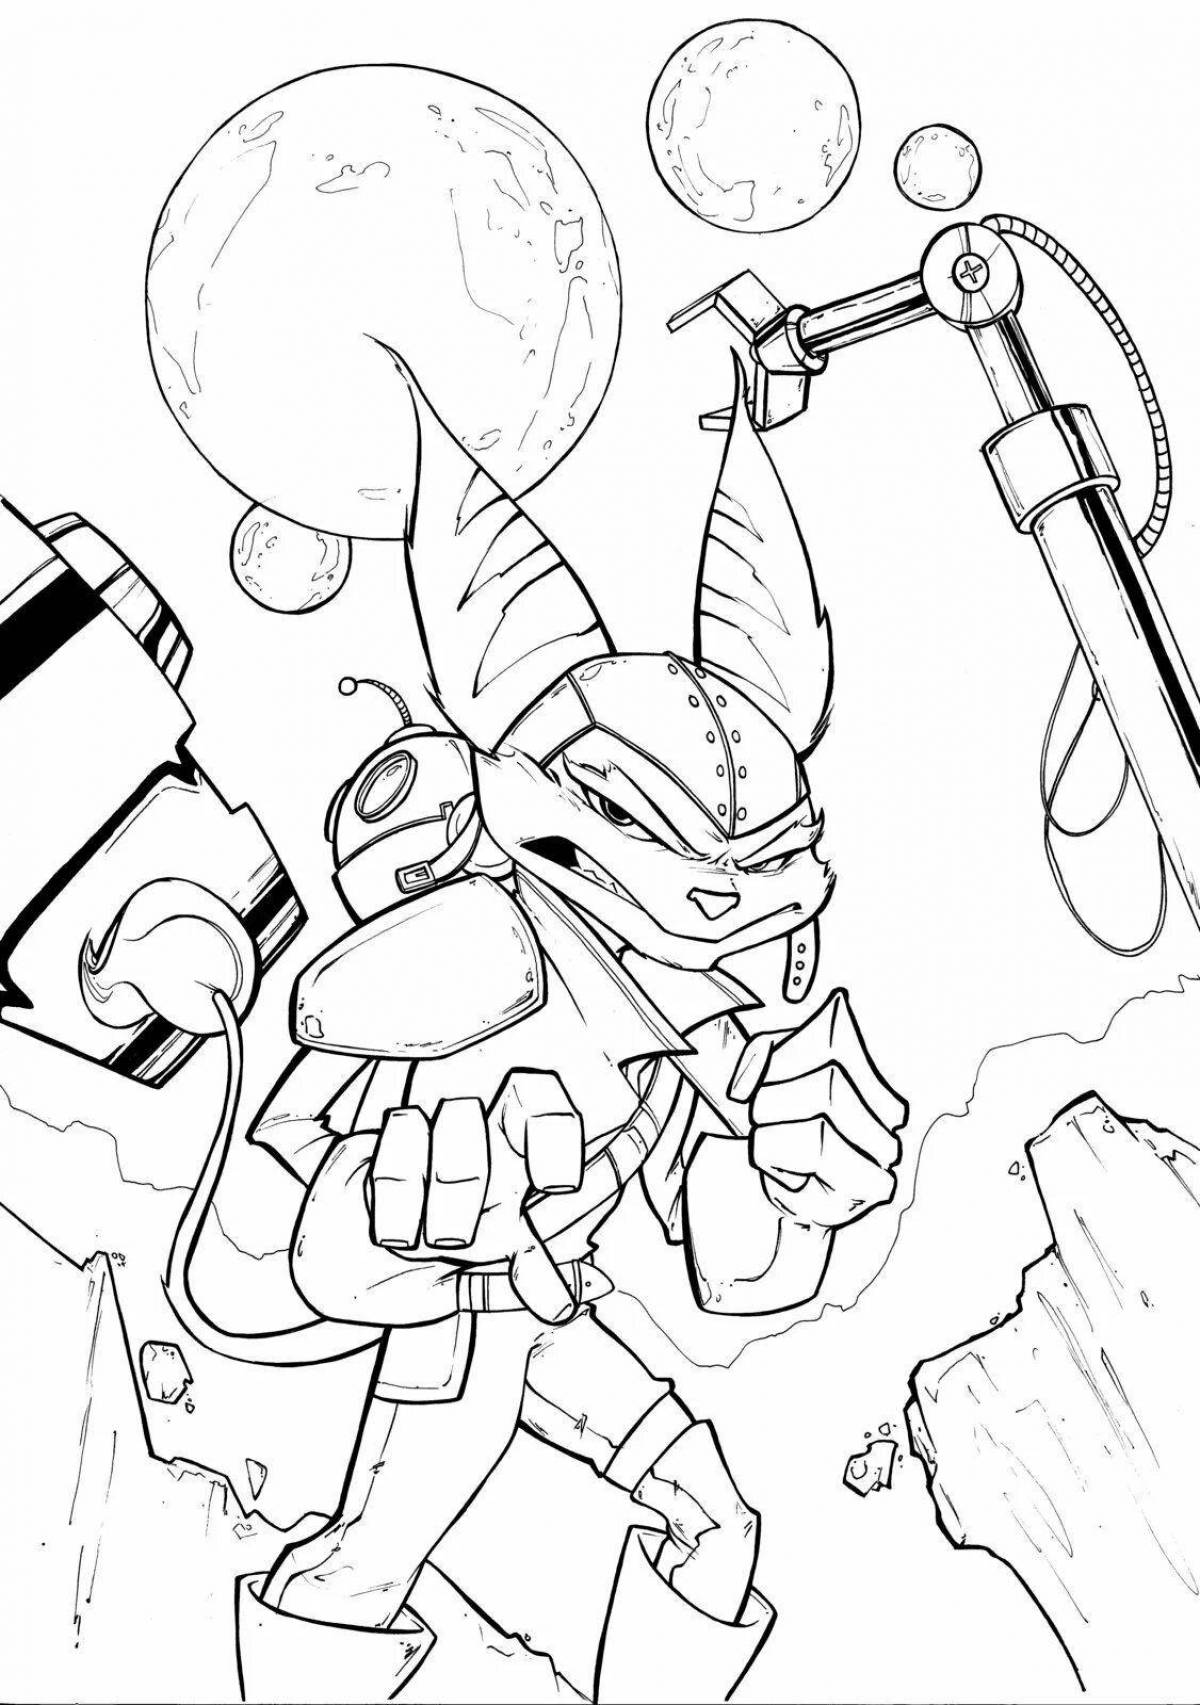 Charming ratchet and clank coloring book